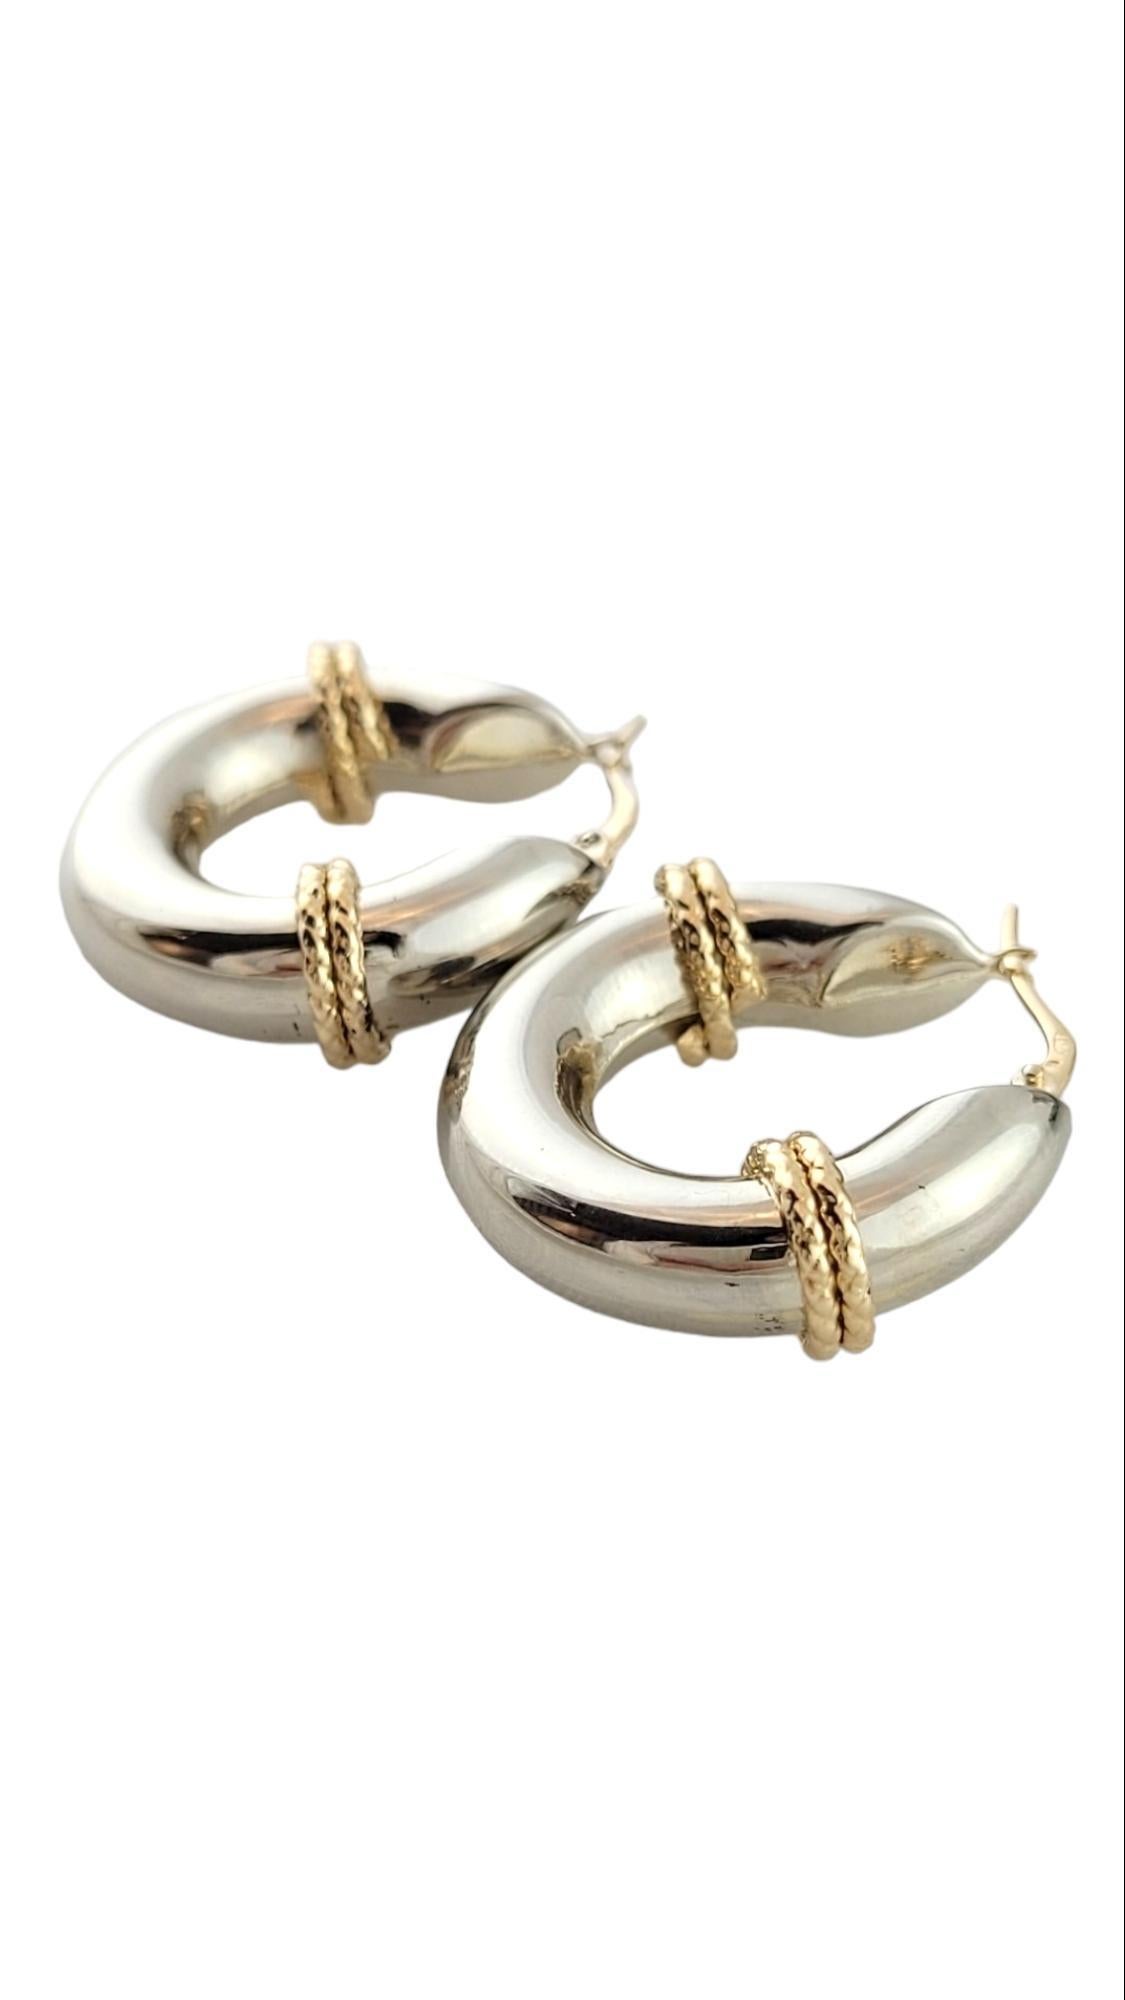 14K White & Yellow Gold Hoops

This gorgeous set of 14K white gold hoops has beautiful yellow gold detailing for a stunning finish!

Diameter: 26.04mm / 1.25